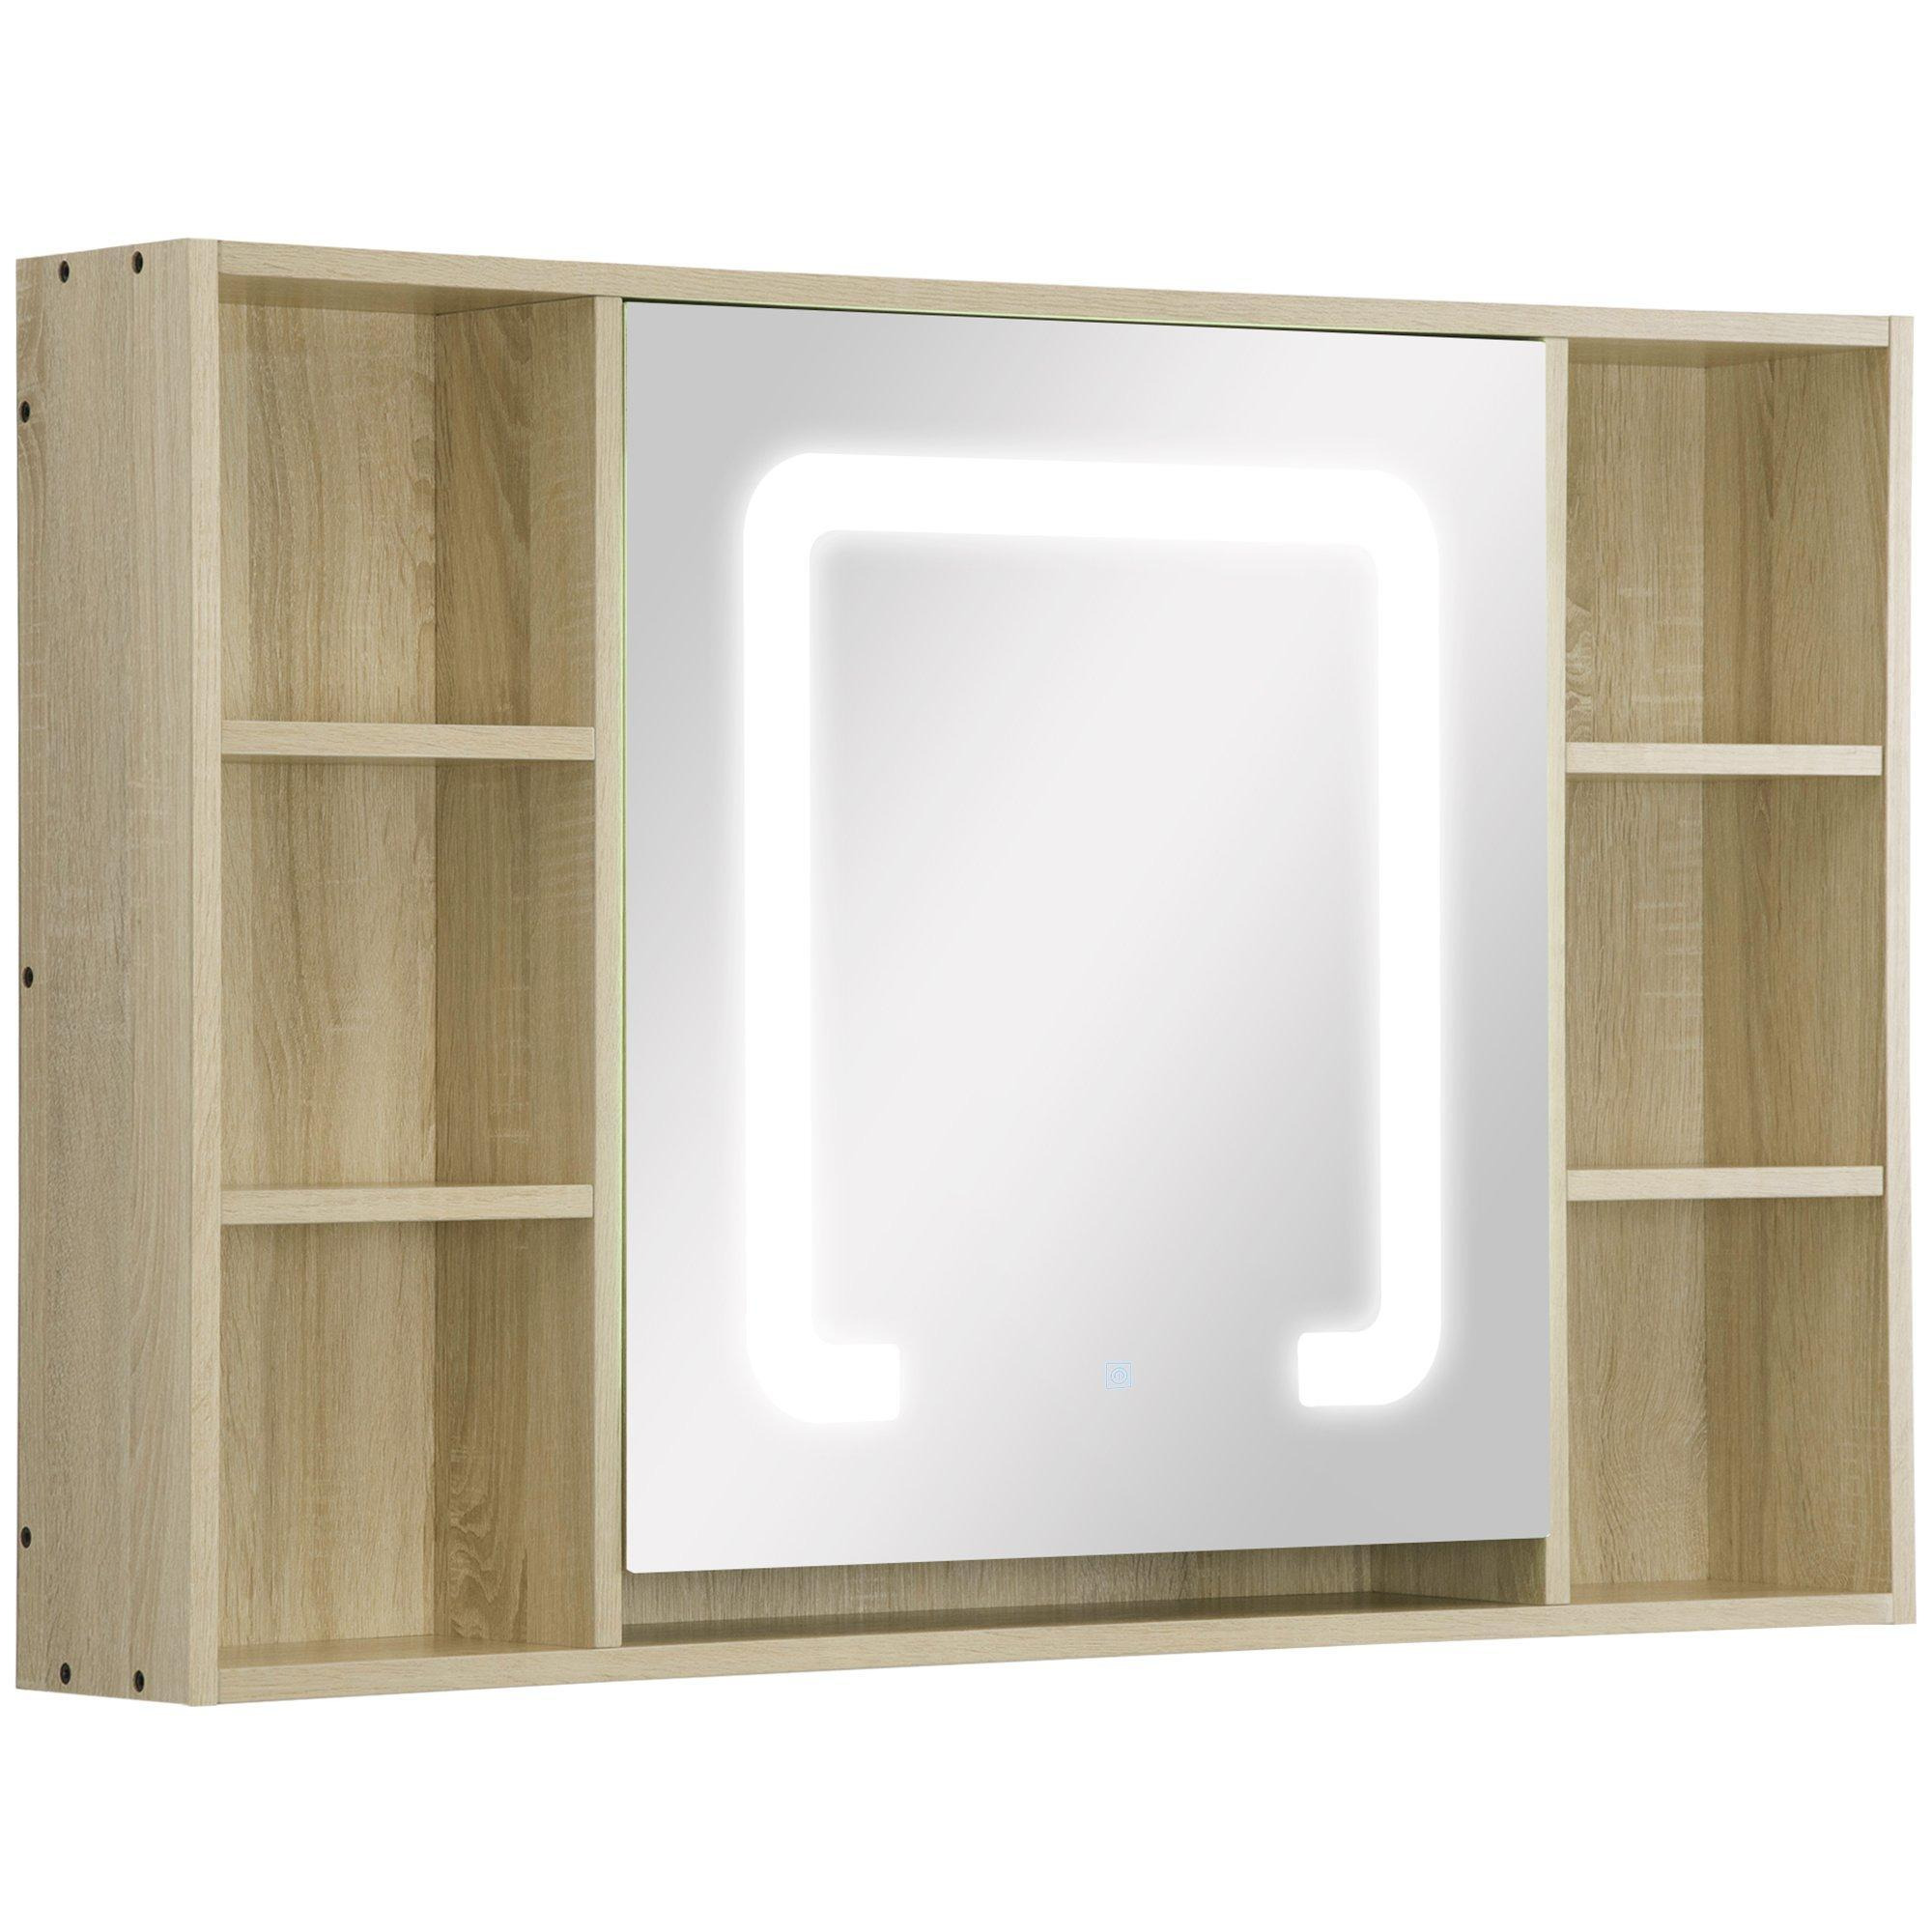 LED Dimmable Bathroom Cabinet Wall Mounted Mirrored Door Shelves - image 1